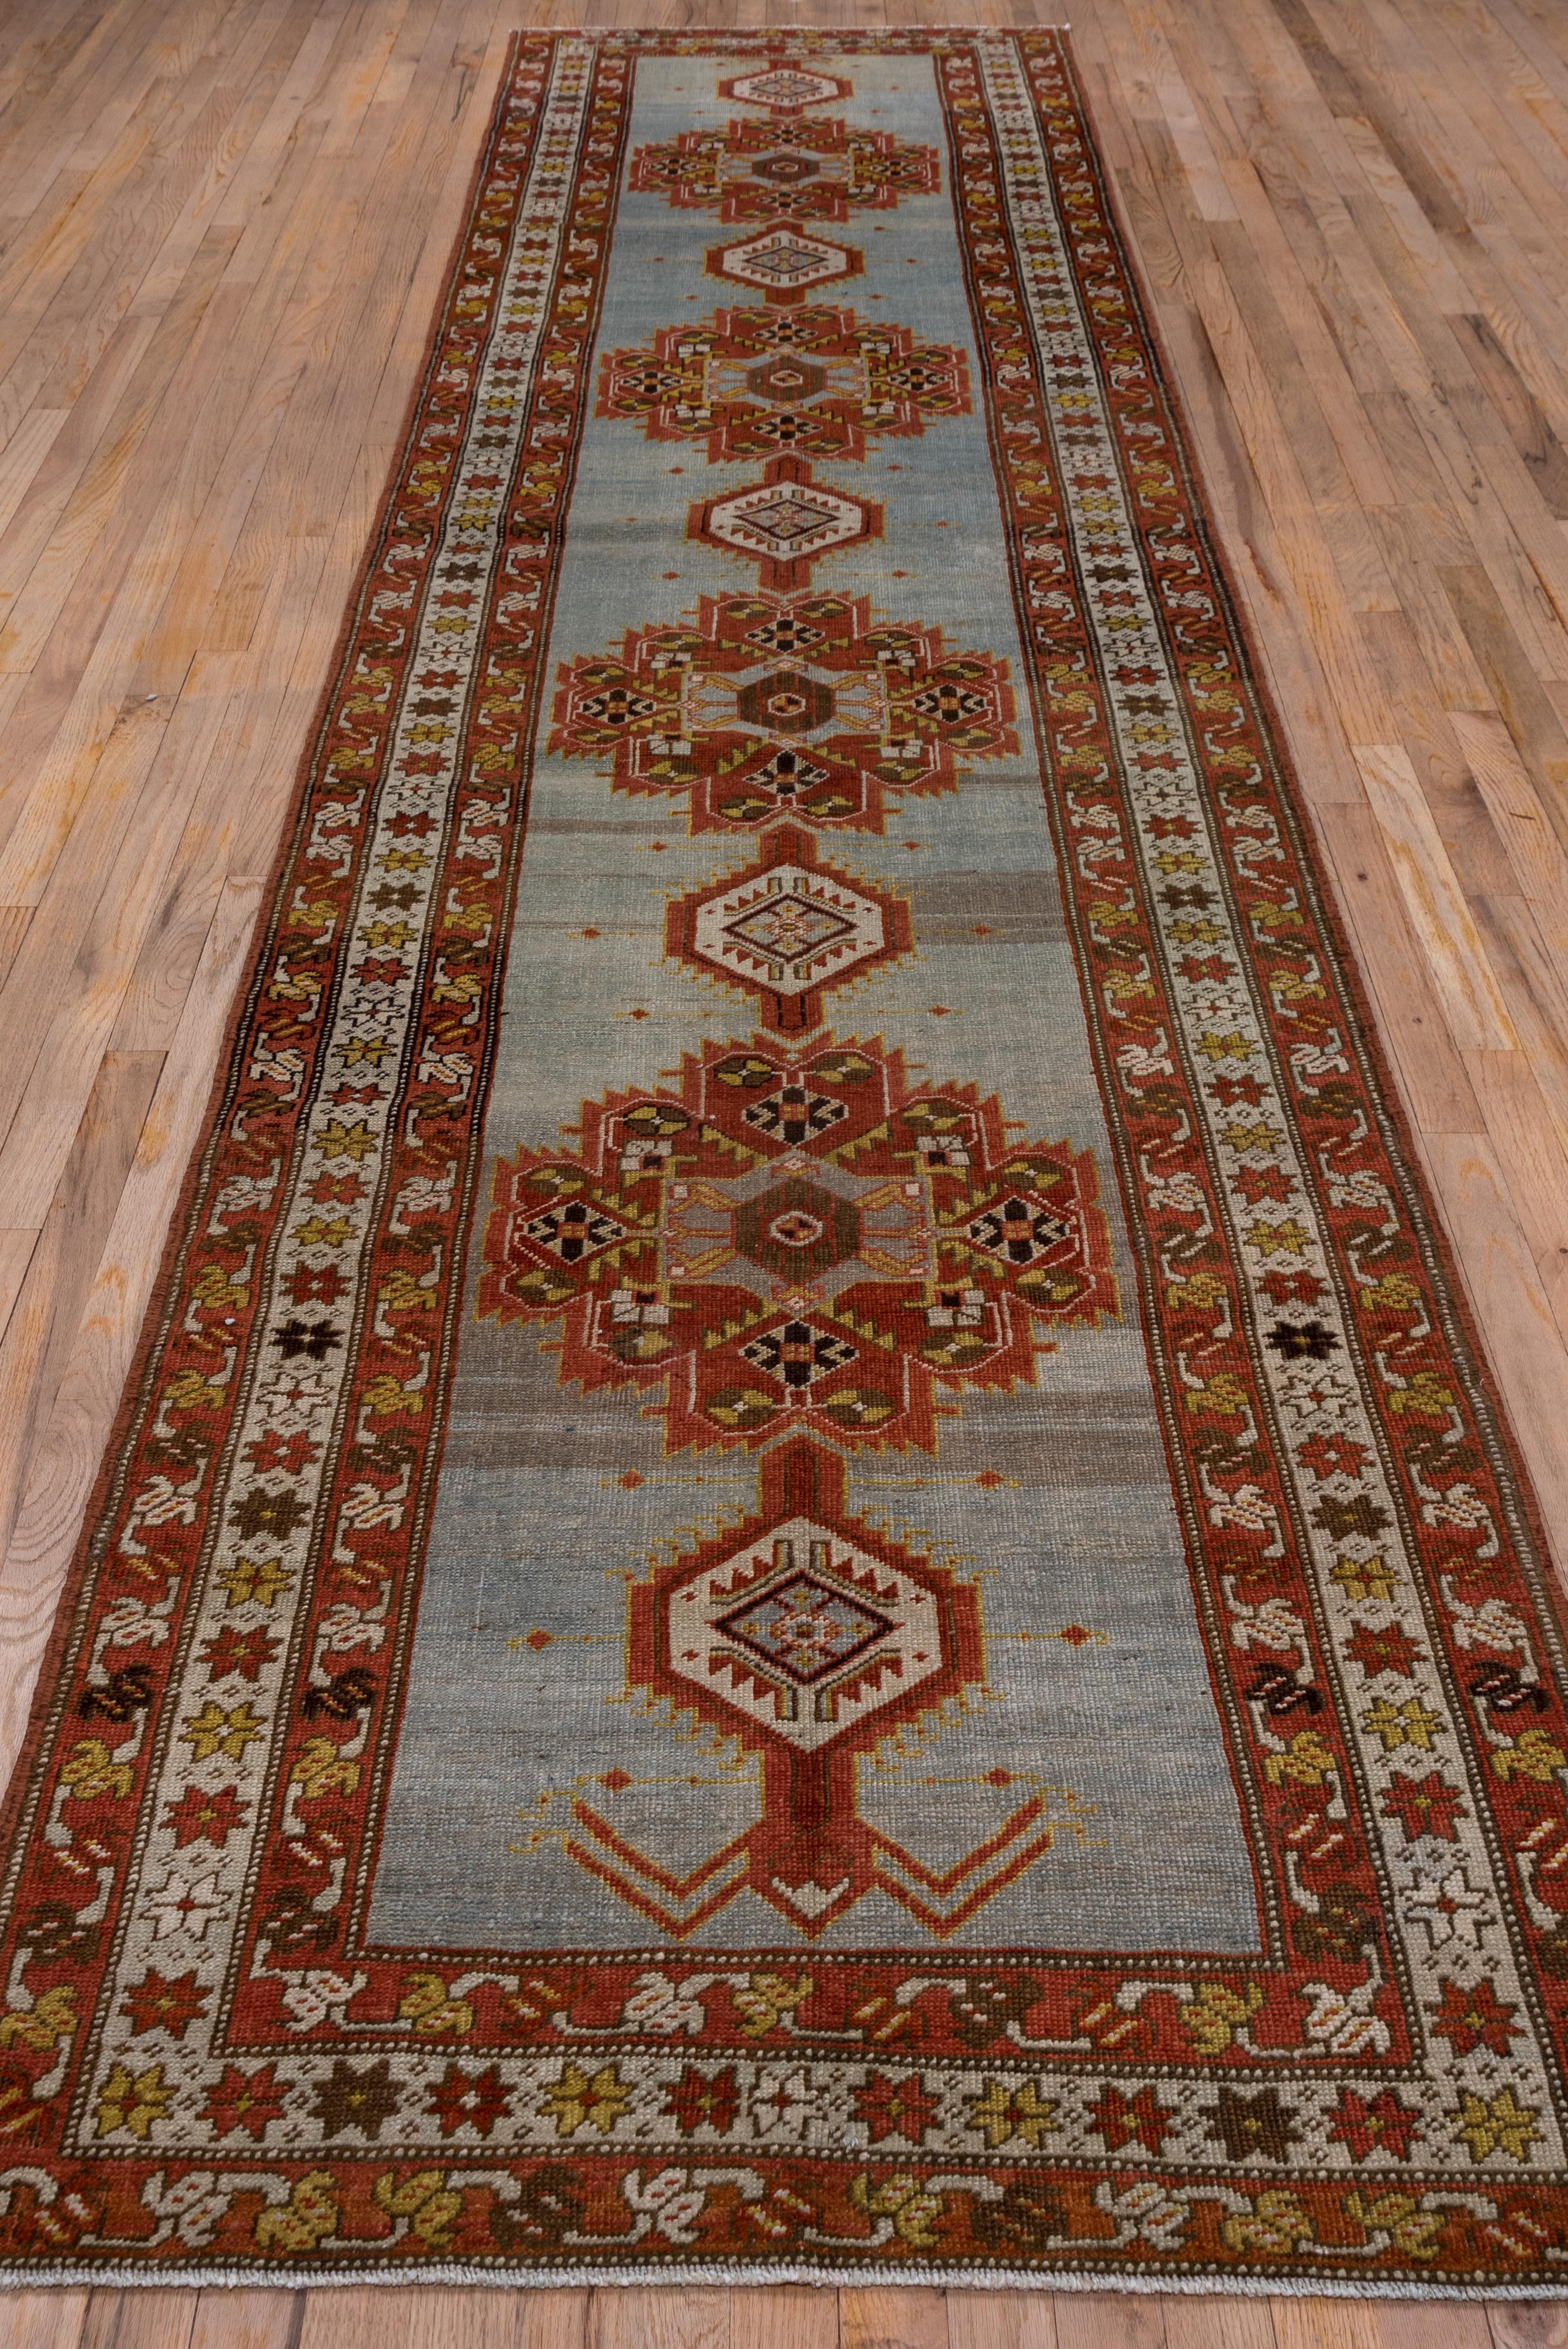 The well-abrashed green field displays four 12-lobed red-brown medallions interspersed with smaller stepped ivory hexagons. The medallions are in the Afshar tribal style. A central ivory star border is flanked by red-brown minors with flip-flop vine